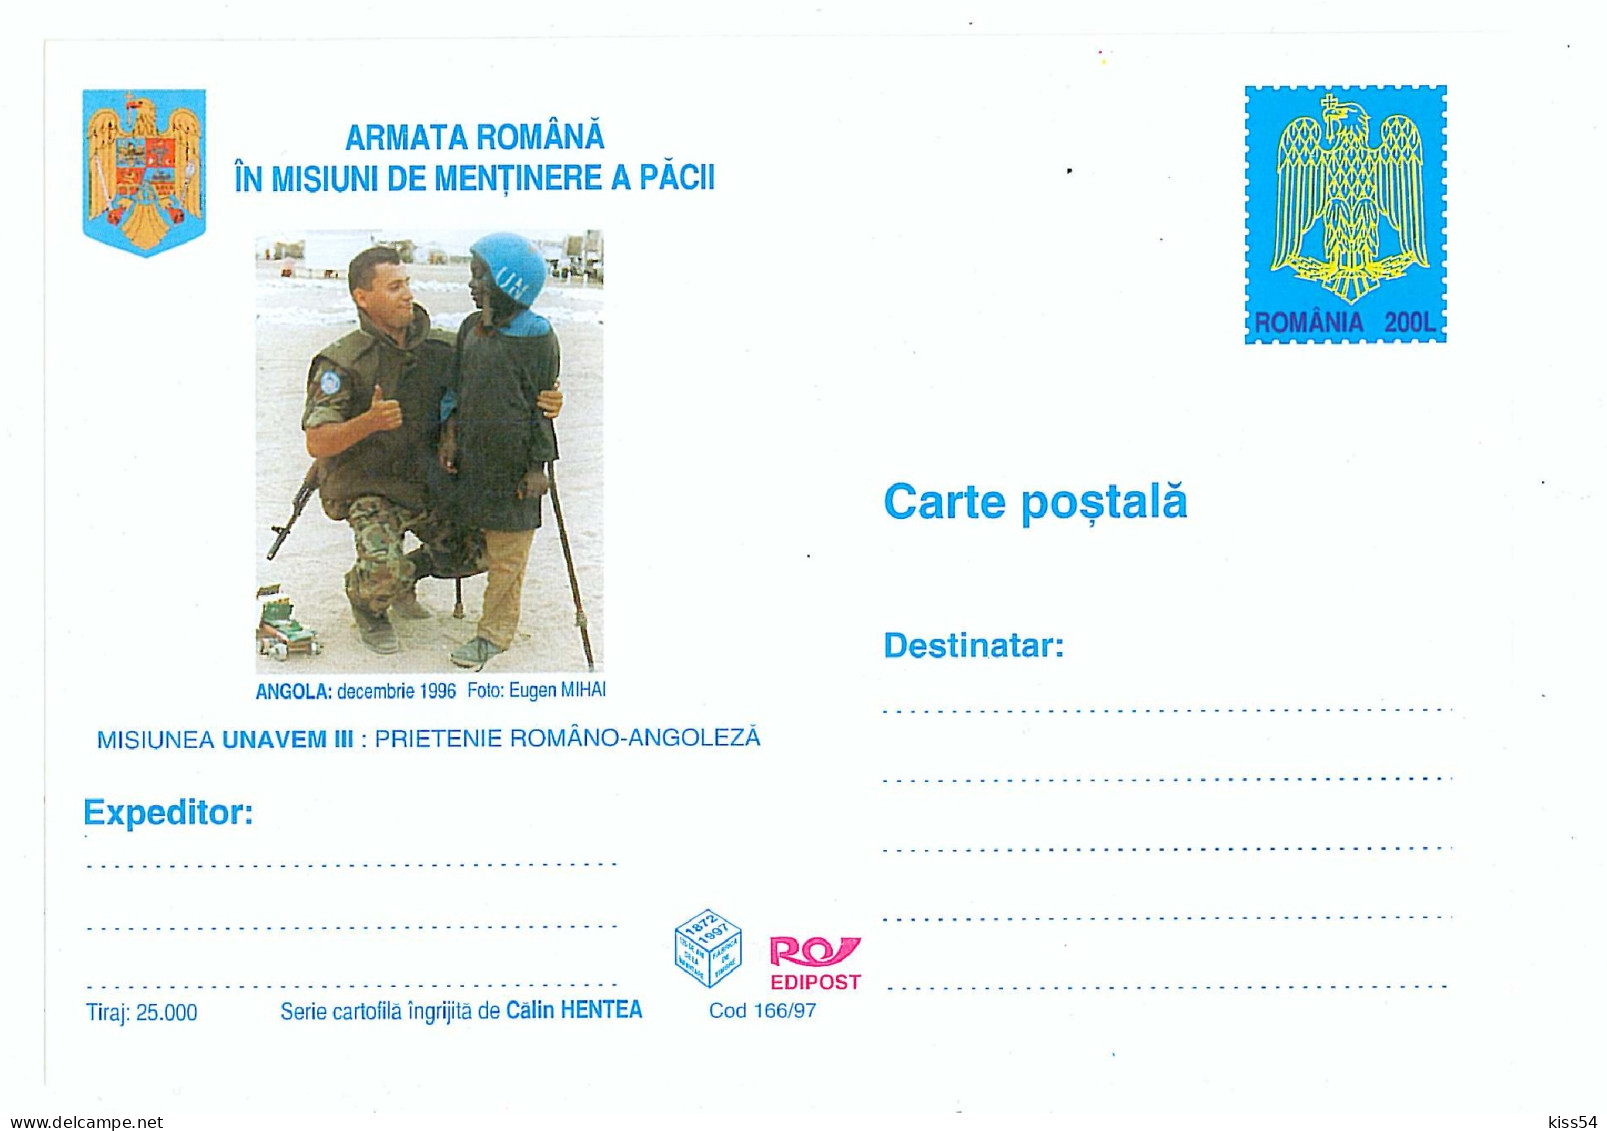 IP 97 - 166 NATO, Romanian Army In Peacekeeping Missions - Stationery - Unused - 1997 - Postal Stationery